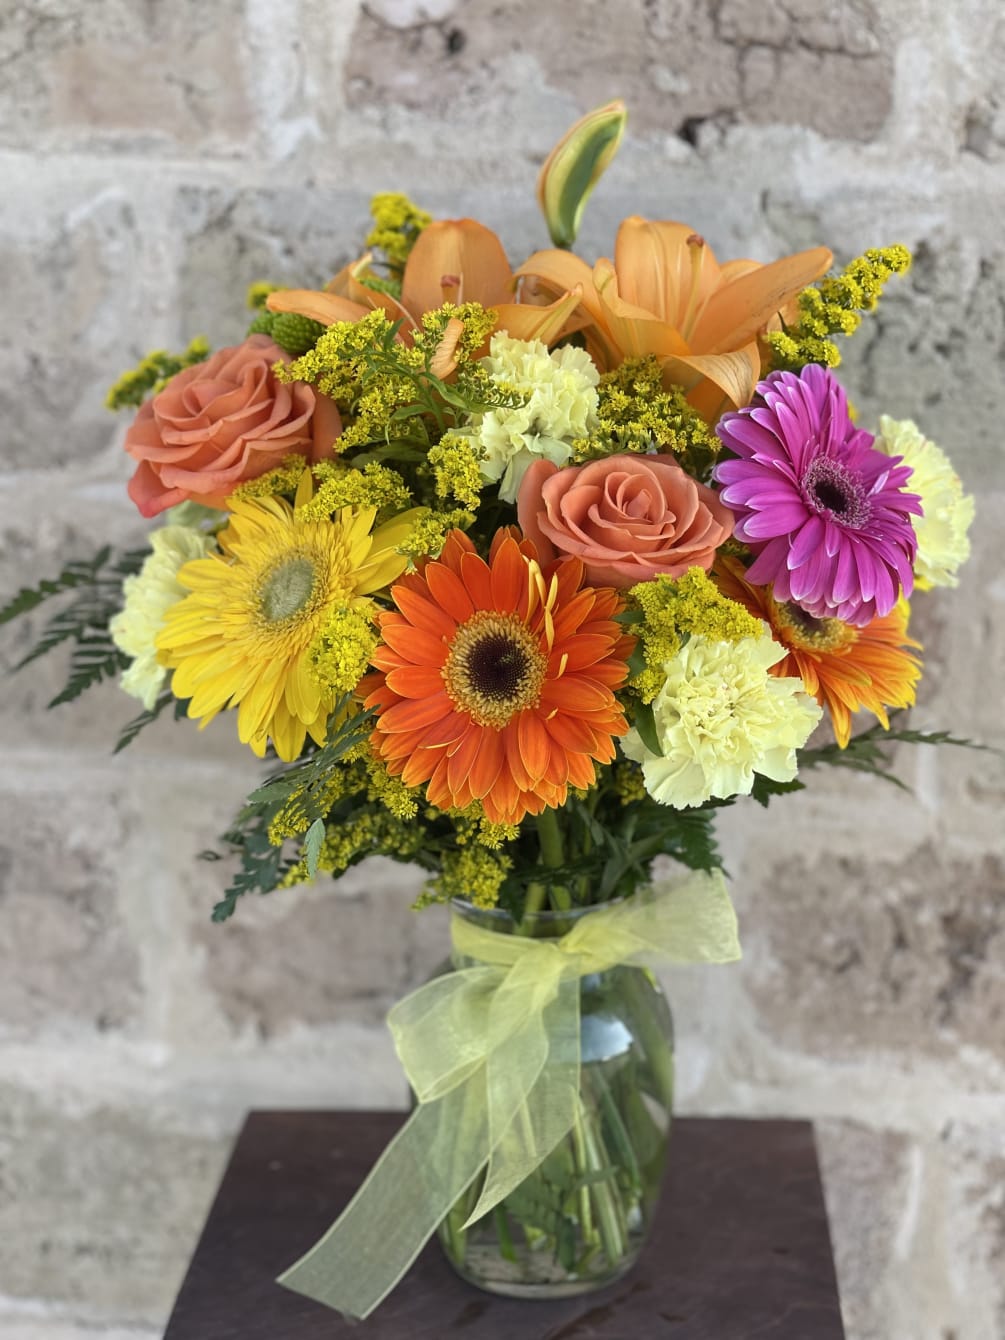 This striking bouquet of yellow and orange assorted flowers in a clear